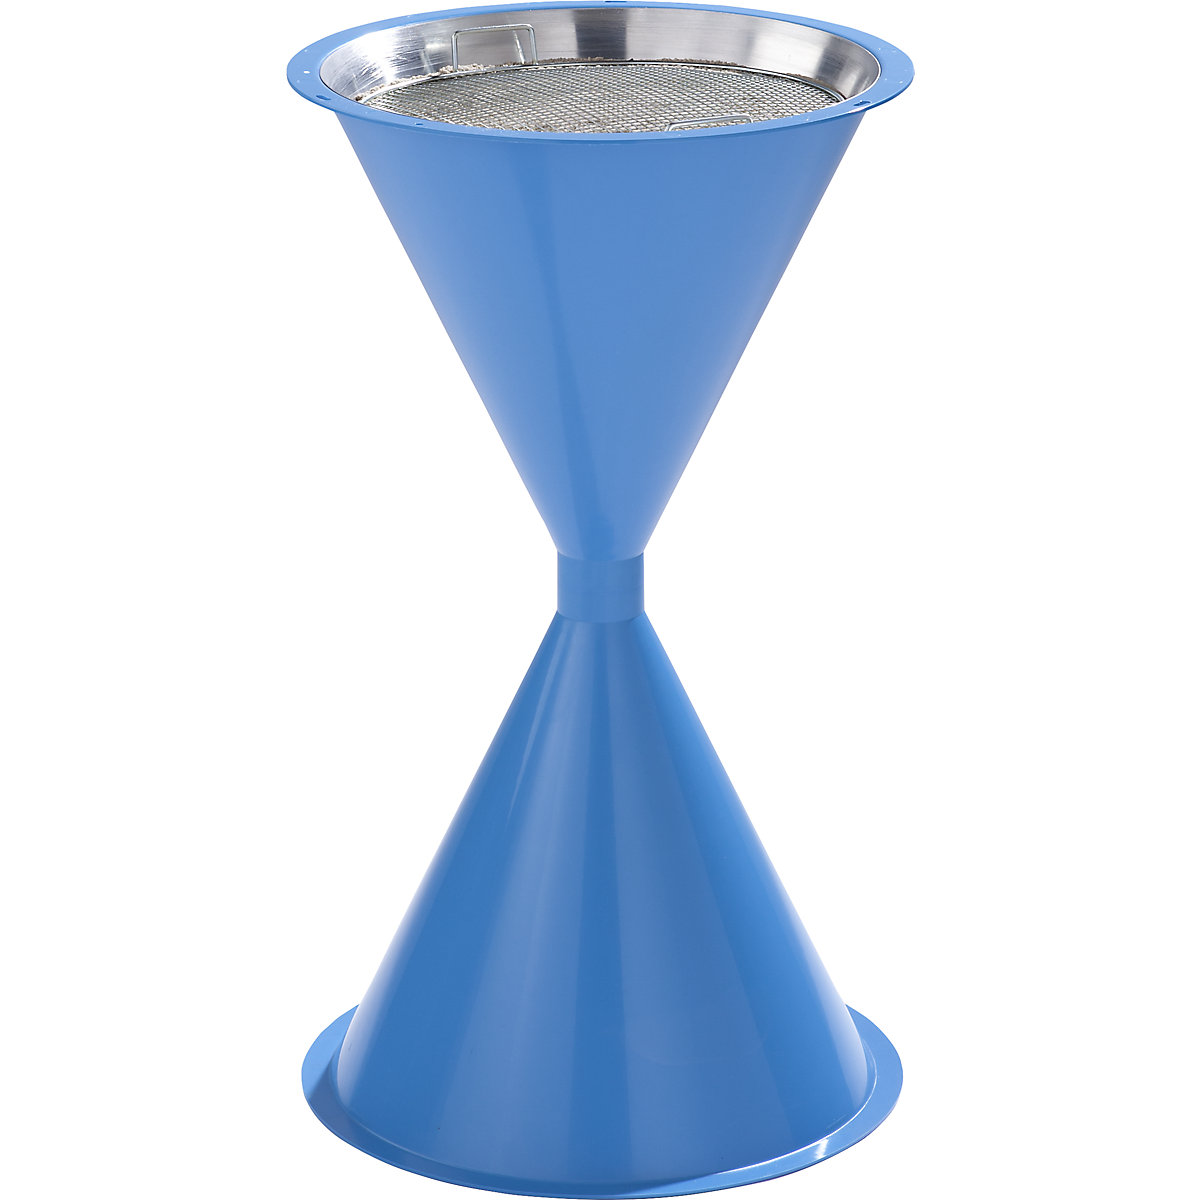 VAR – Conical pedestal ashtray made of plastic, without hood, light blue